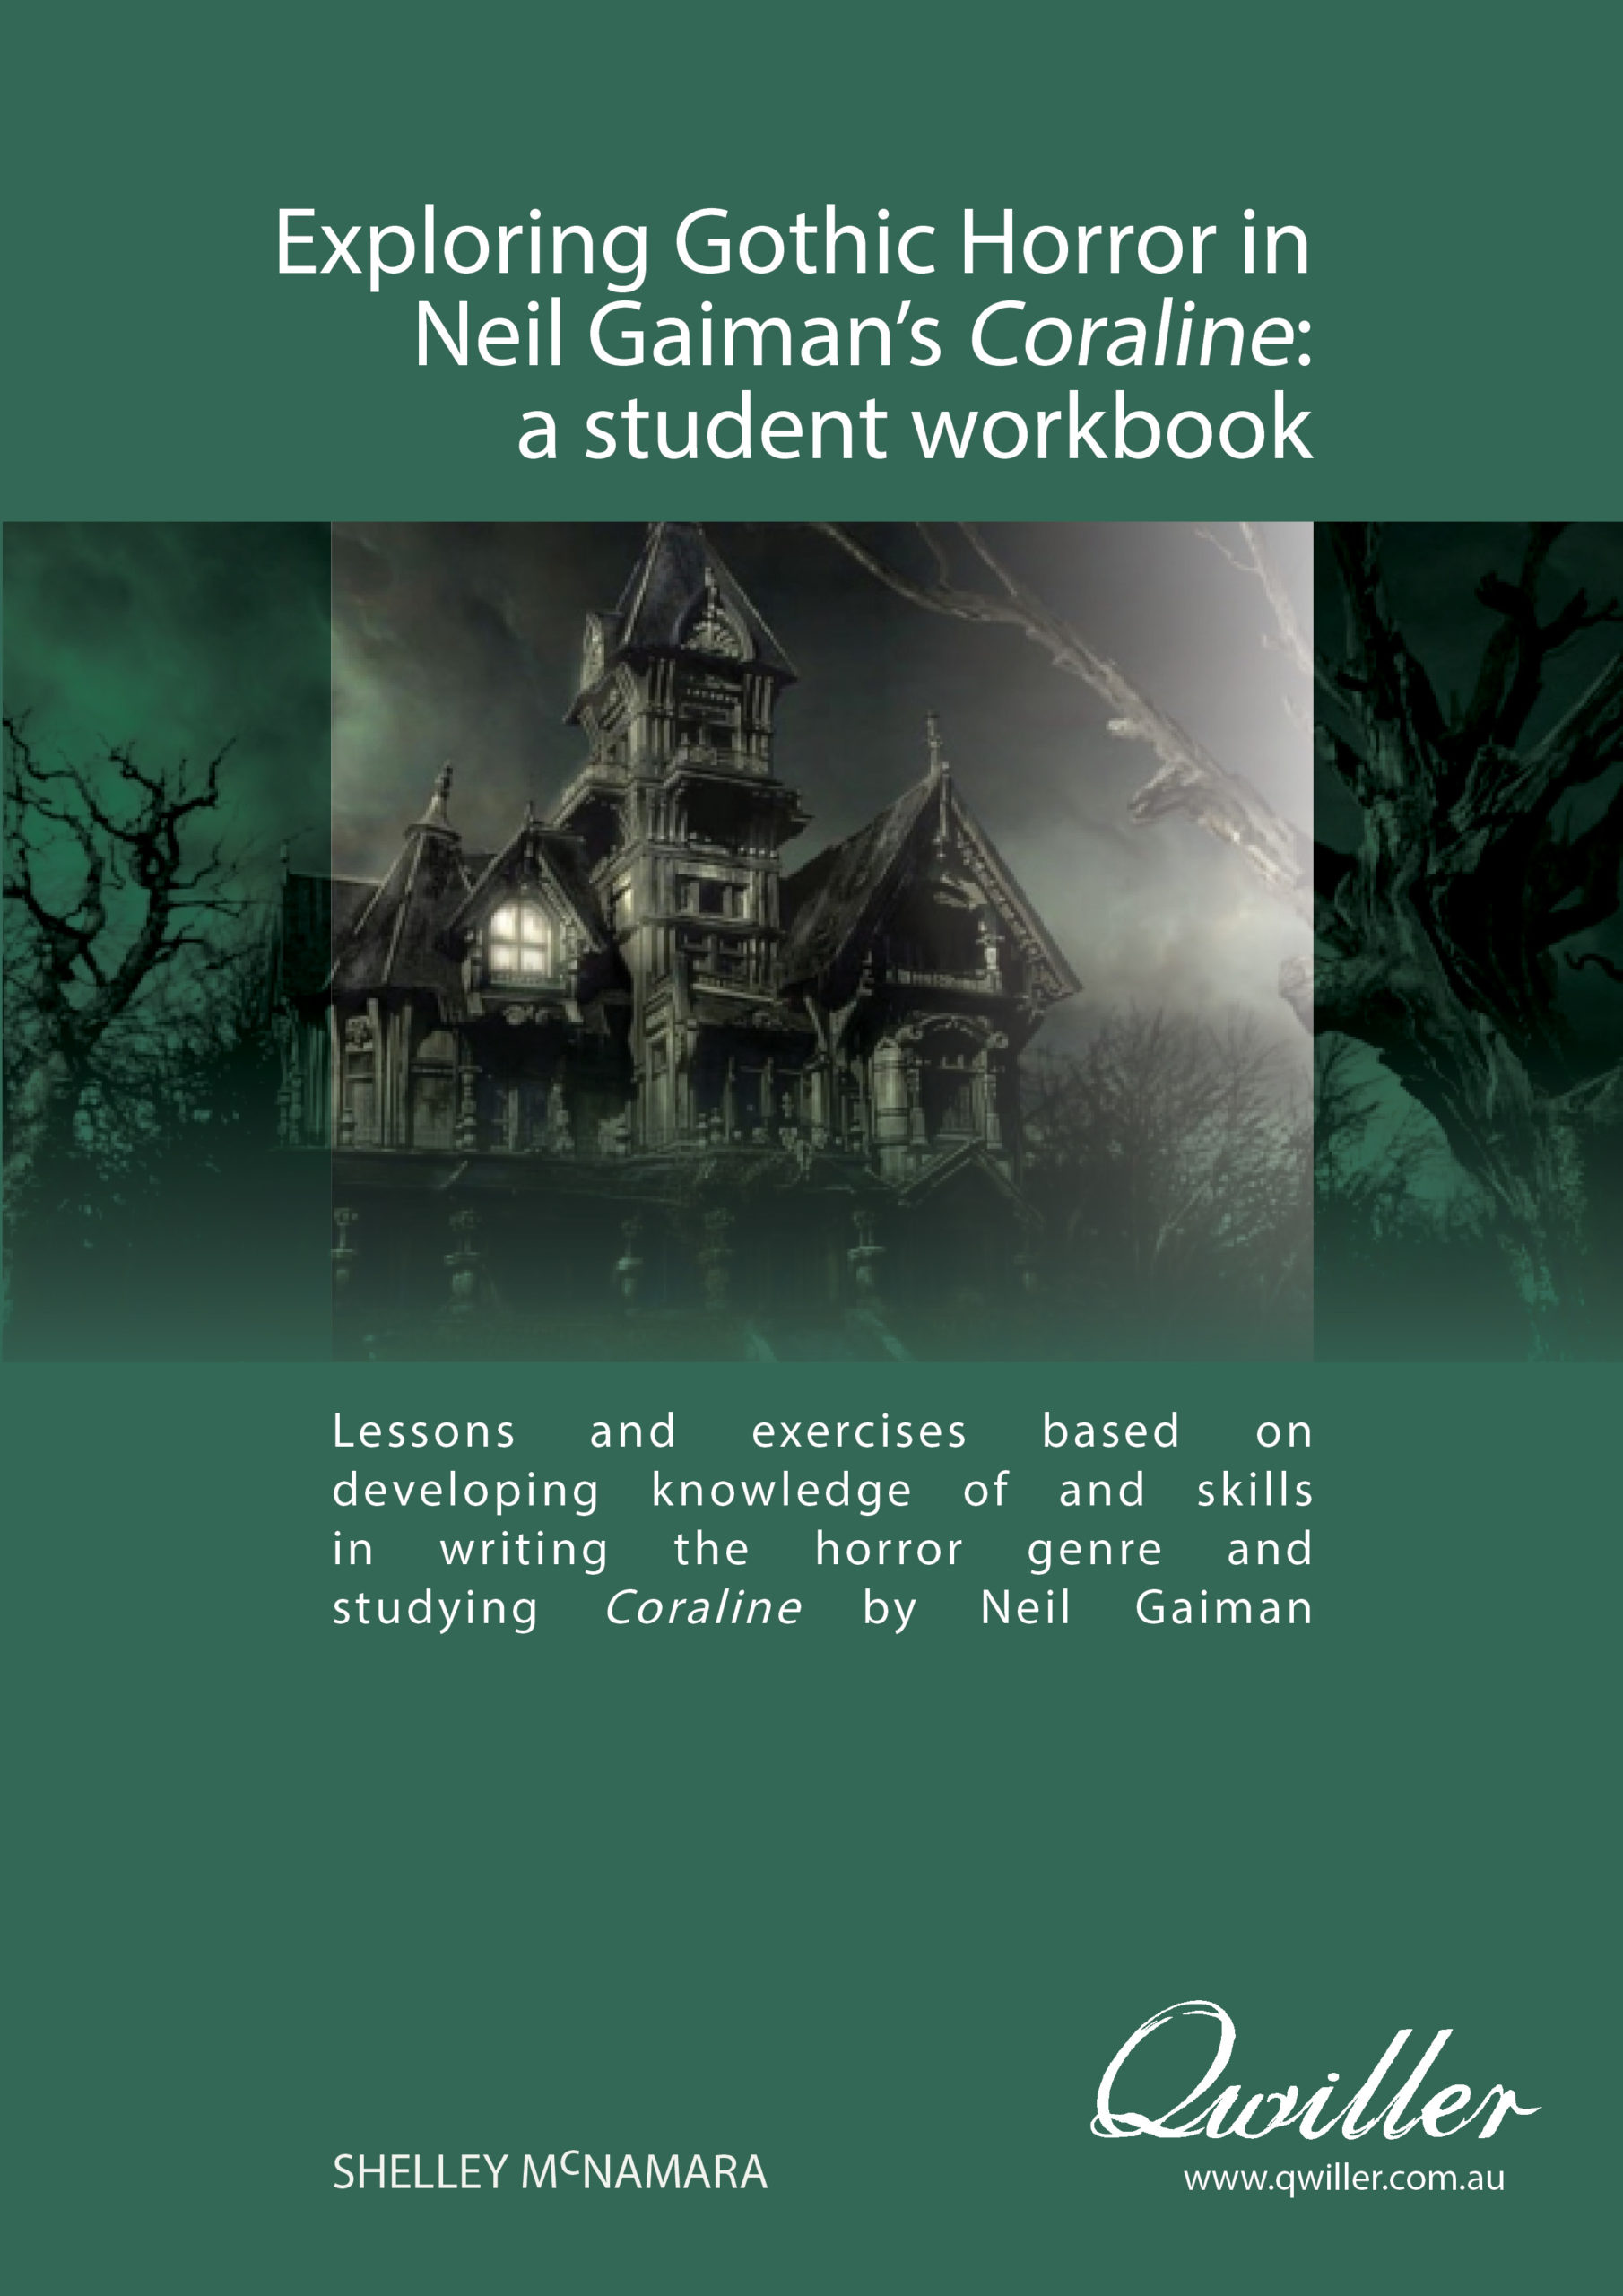 Coraline:　Qwiller　student　Exploring　Horror　–　Gaiman's　workbook　Gothic　a　Neil　in　Publishing